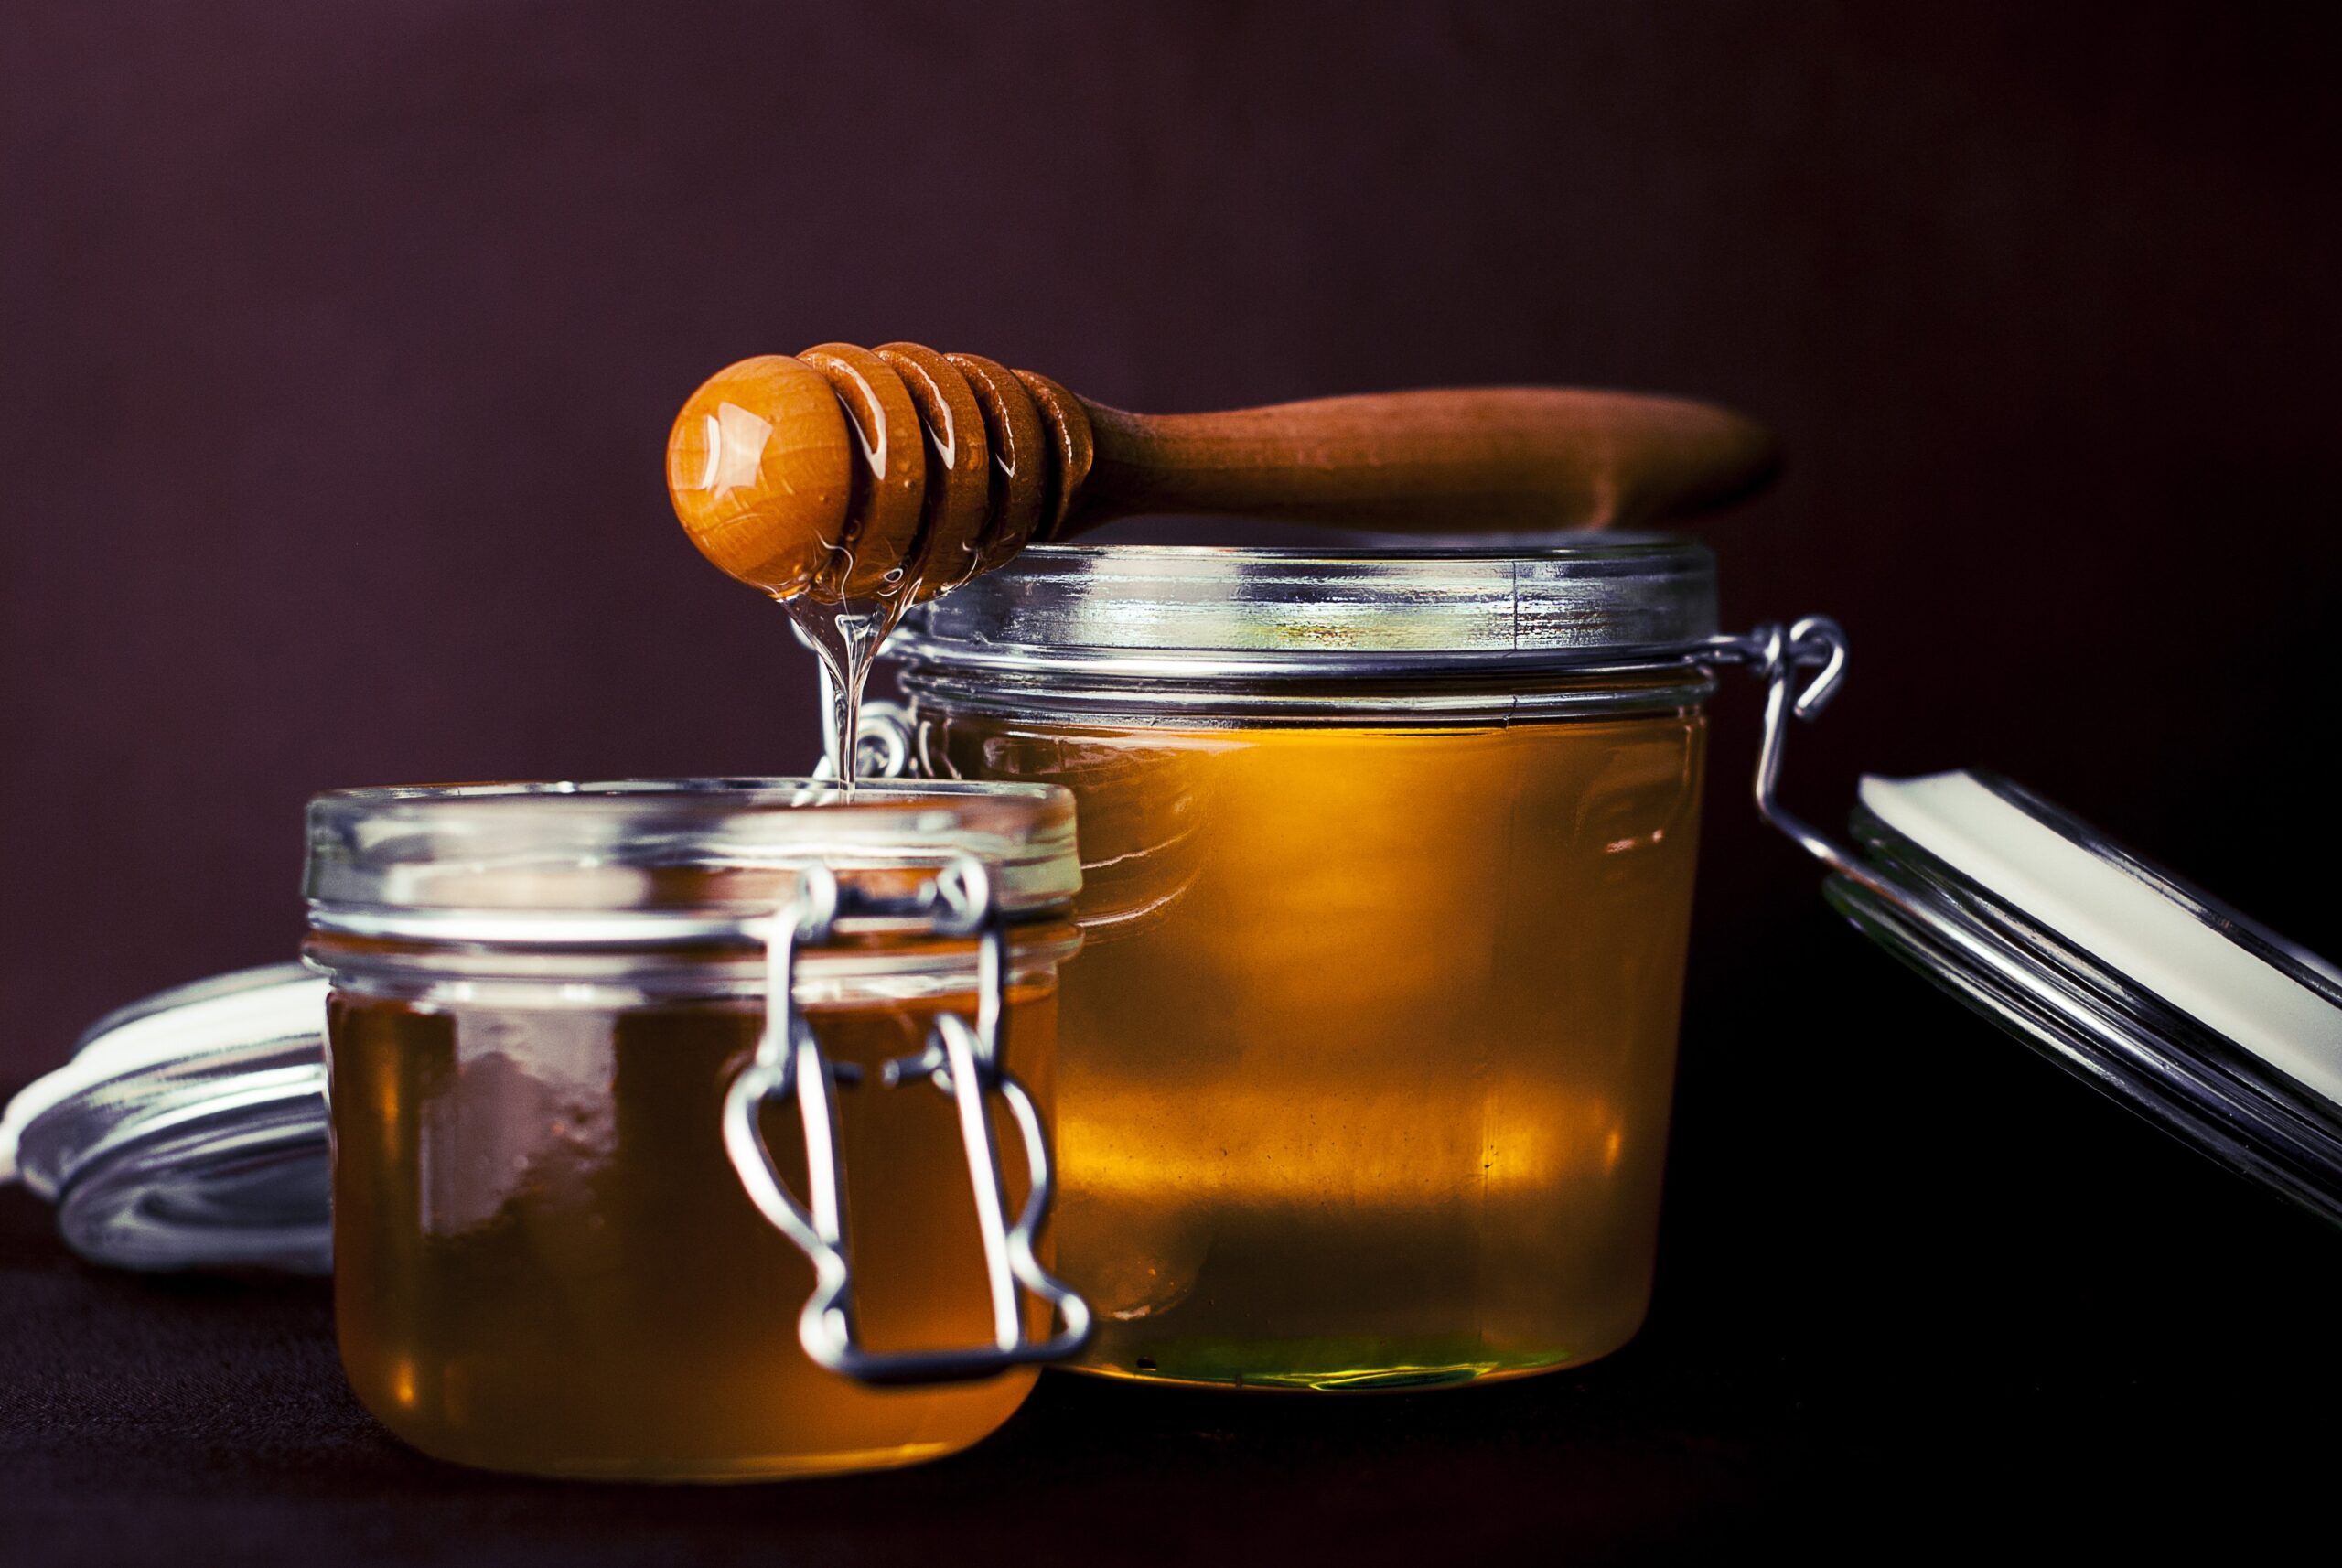 Here Are the Ultimate 6 Health And Beauty Benefits Of Honey that Will Make Your Body Shine